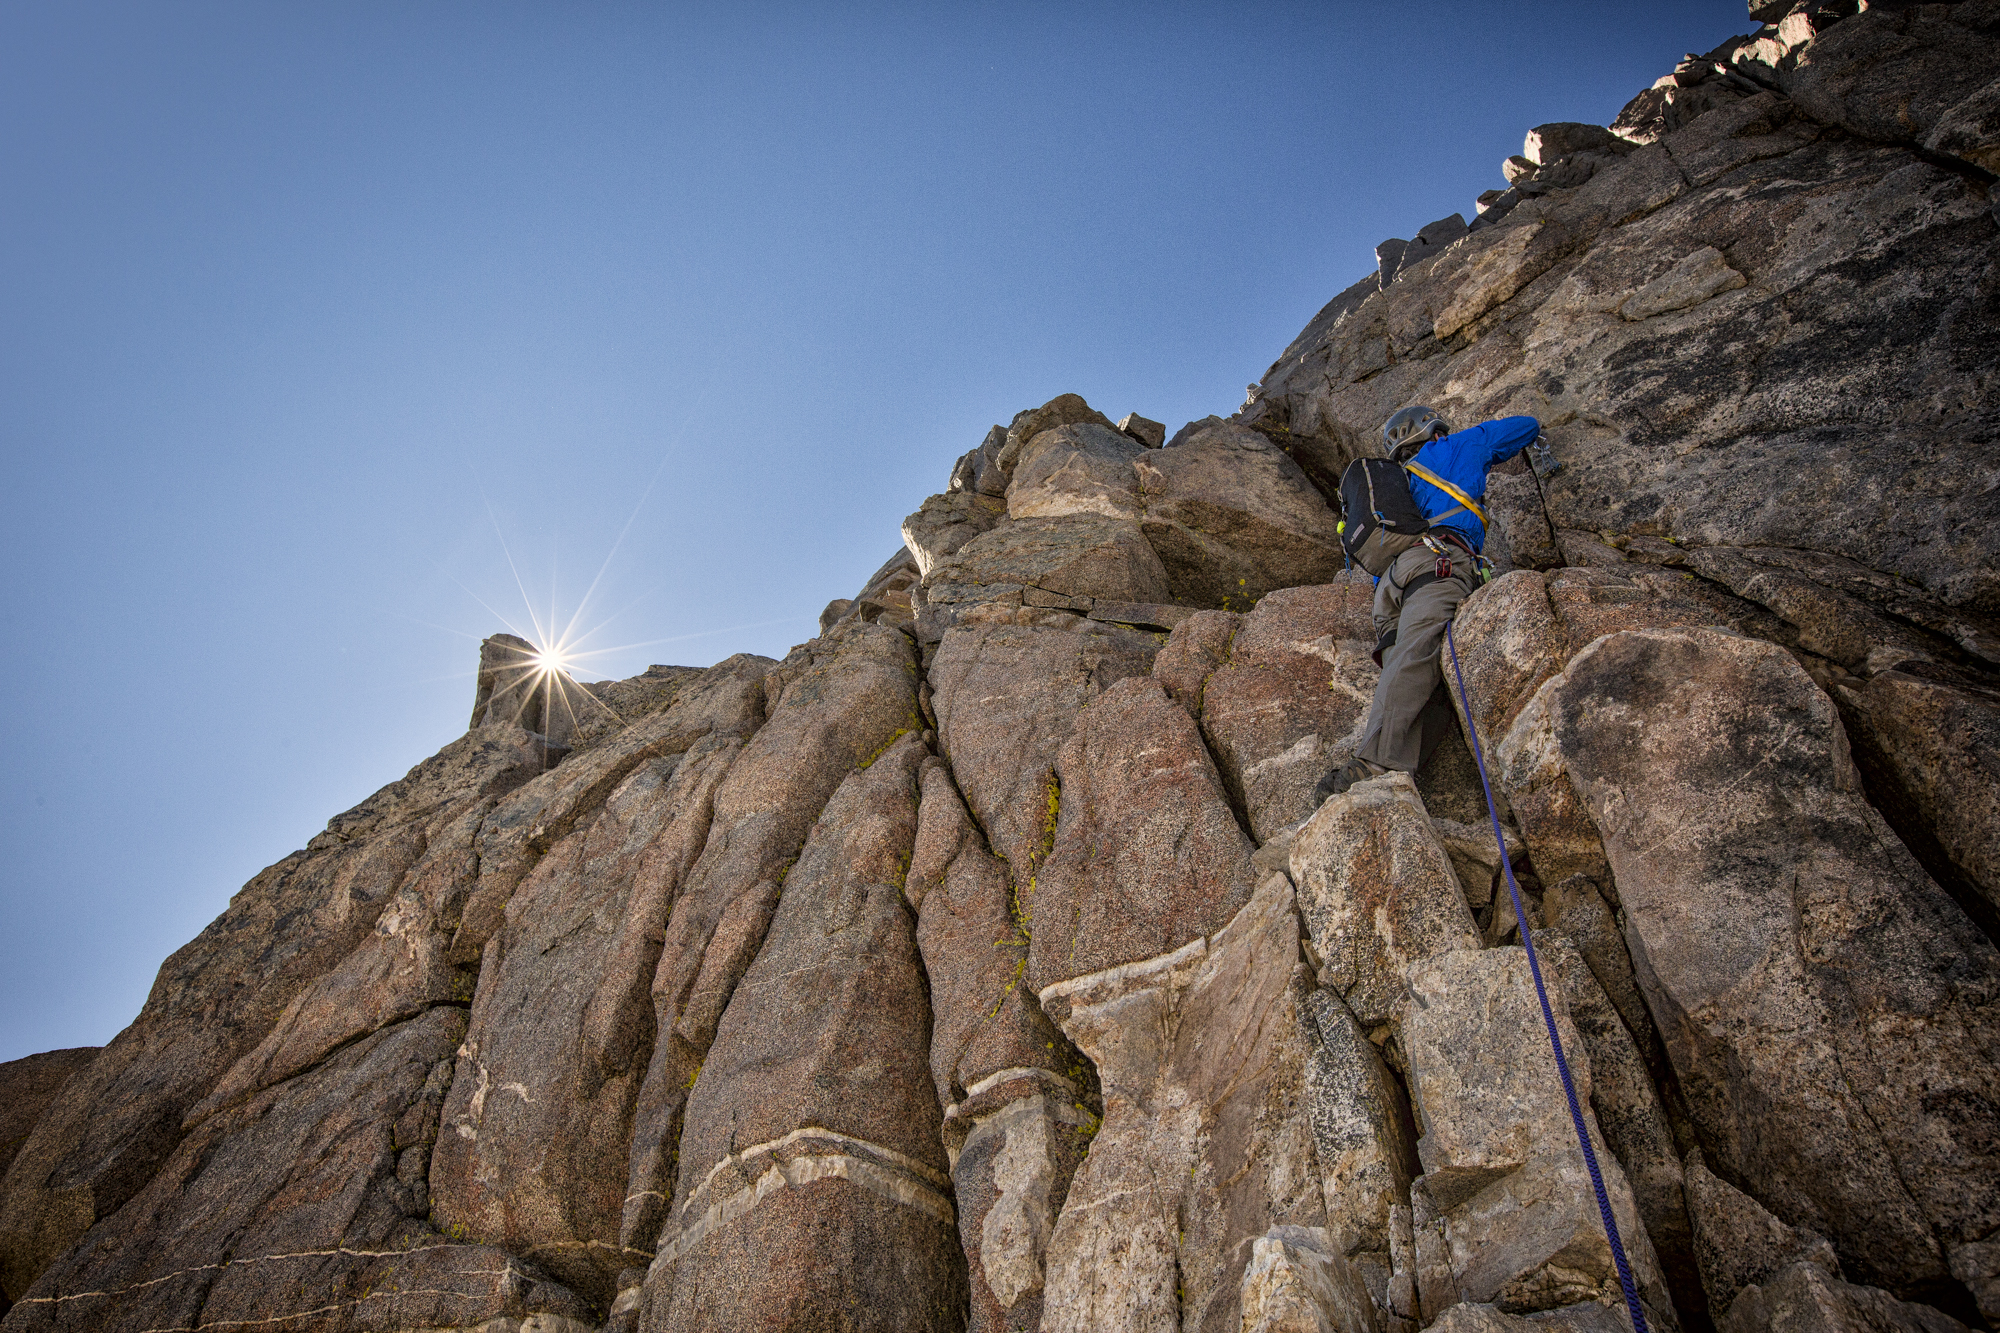 Climbing the final pitch to the summit of Thunderbolt Peak, Kings Canyon National Park. I was belaying my friend and only took my hands off the rope when he was in a secure position, just as the sun peaked above the rock. No climbers were hurt in getting the shot.